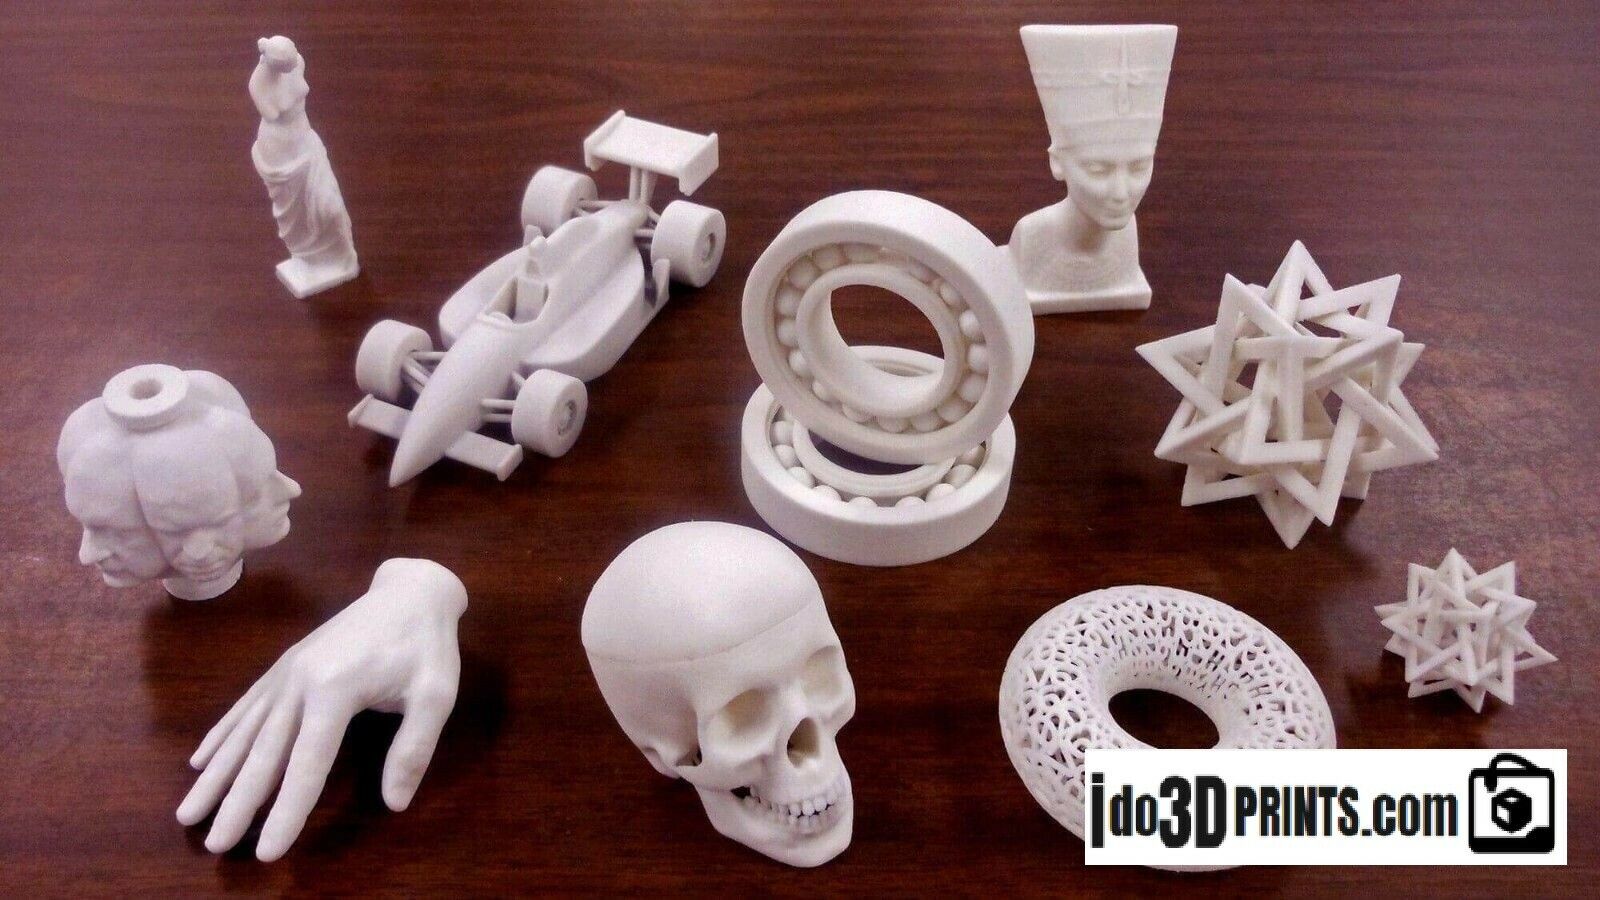 3d Printing Service ⭐️⭐️⭐️⭐️⭐️ 💜10% Of Sales To Wounded Warrior Project💜